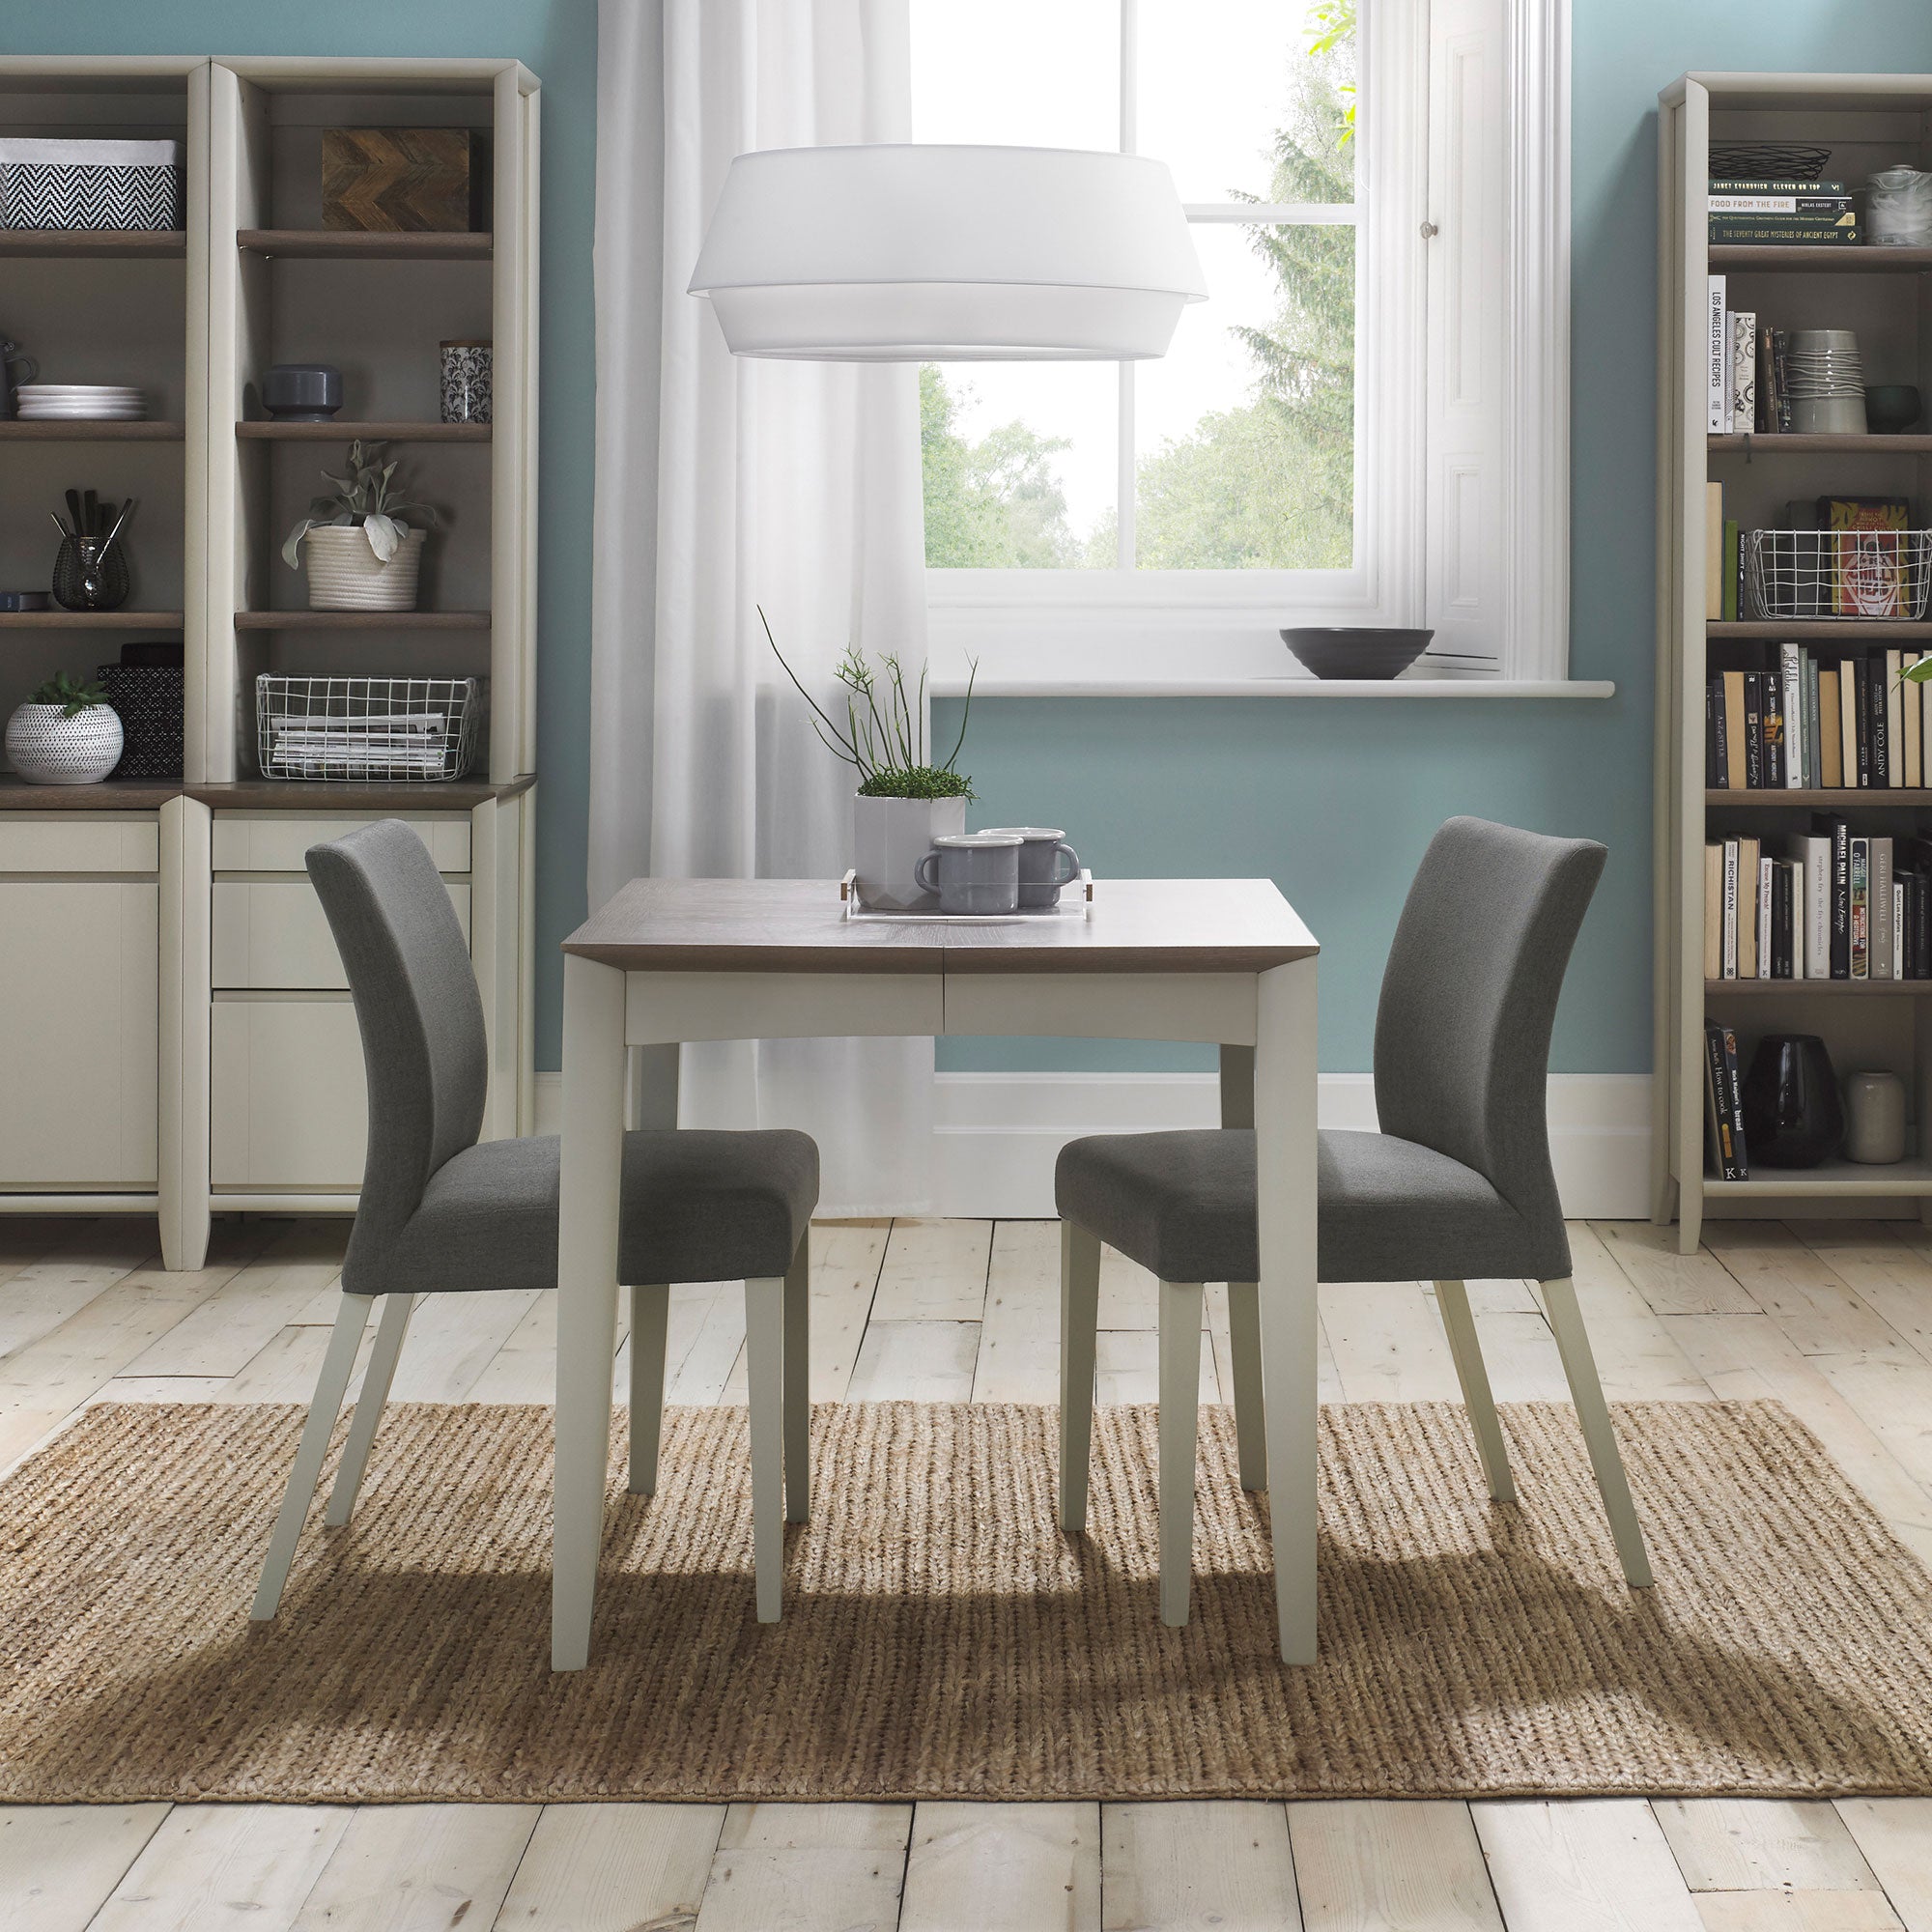 4-6 Extending Dining Table In Grey Washed Oak With Soft Grey Finish